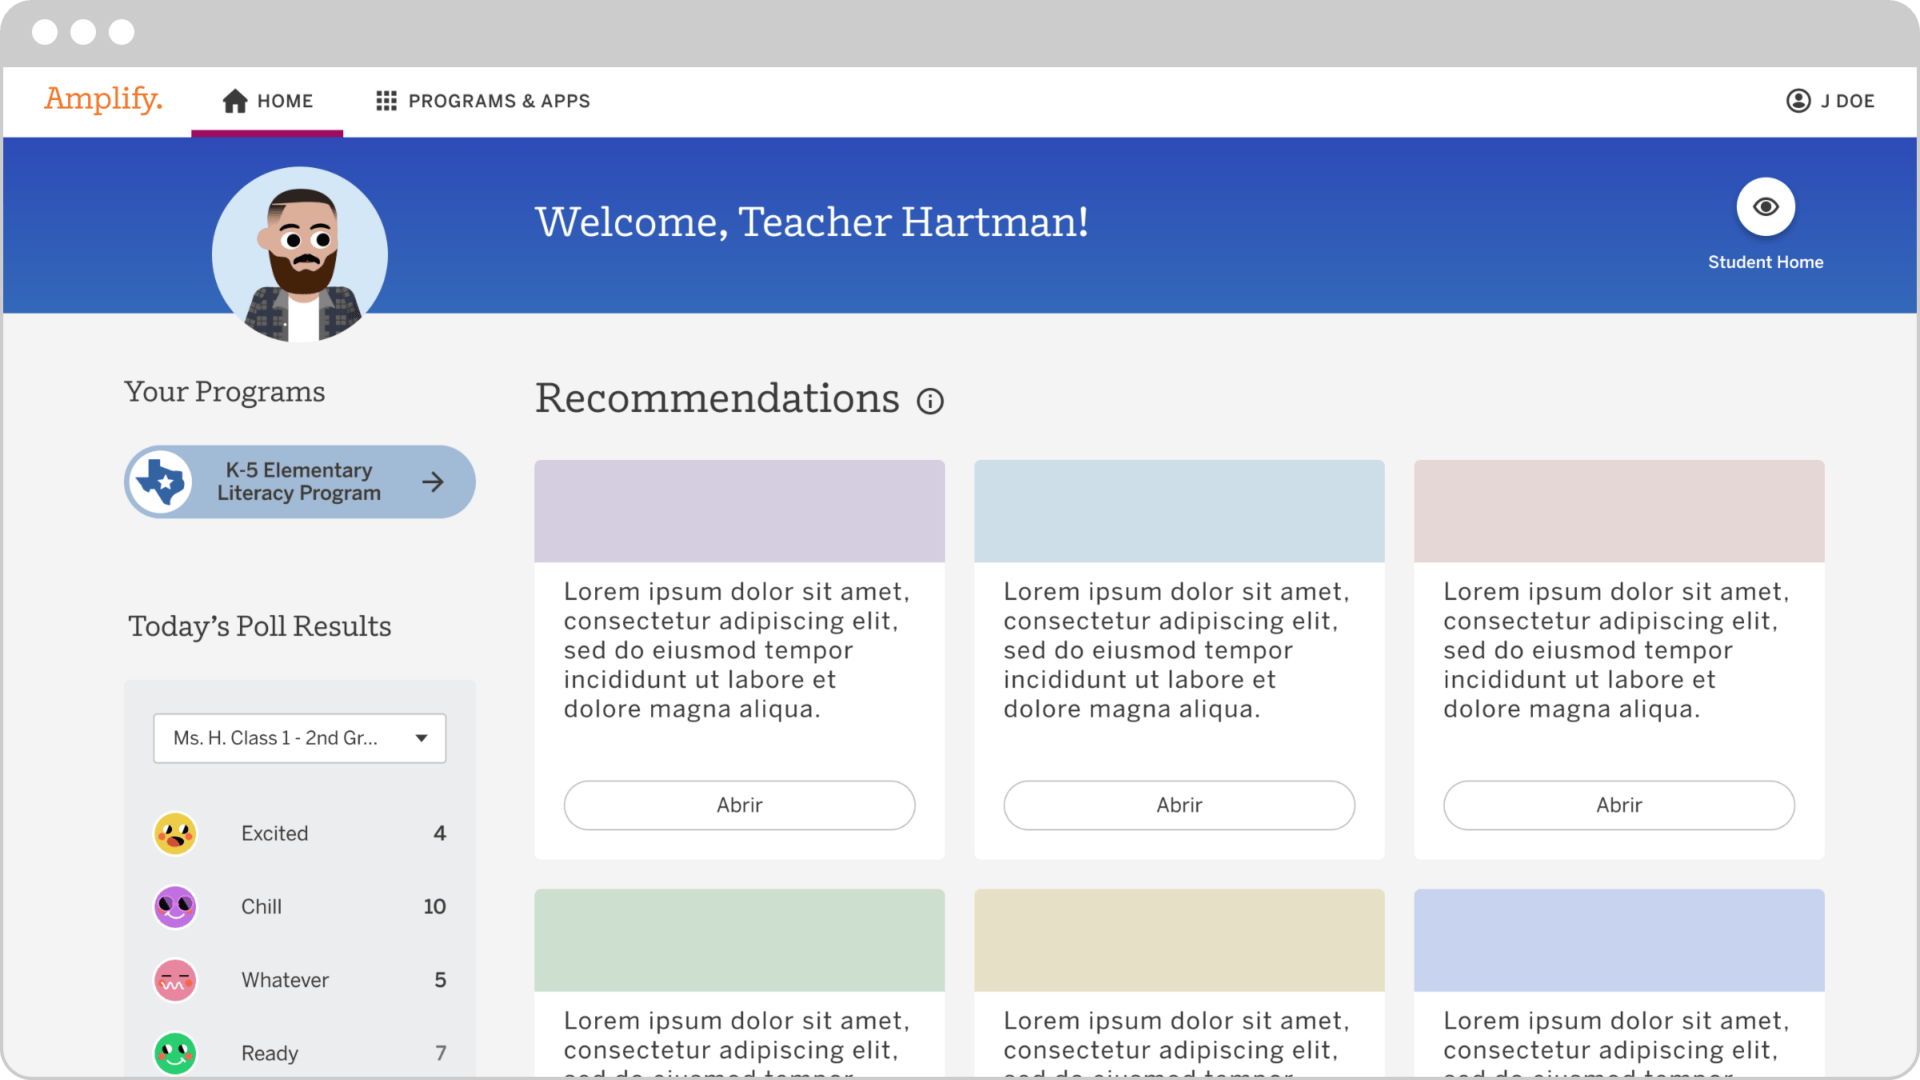 Educational software interface displaying a user profile with a teacher avatar, program recommendations, and various educational resources, including CKLA and notifications for classroom use.